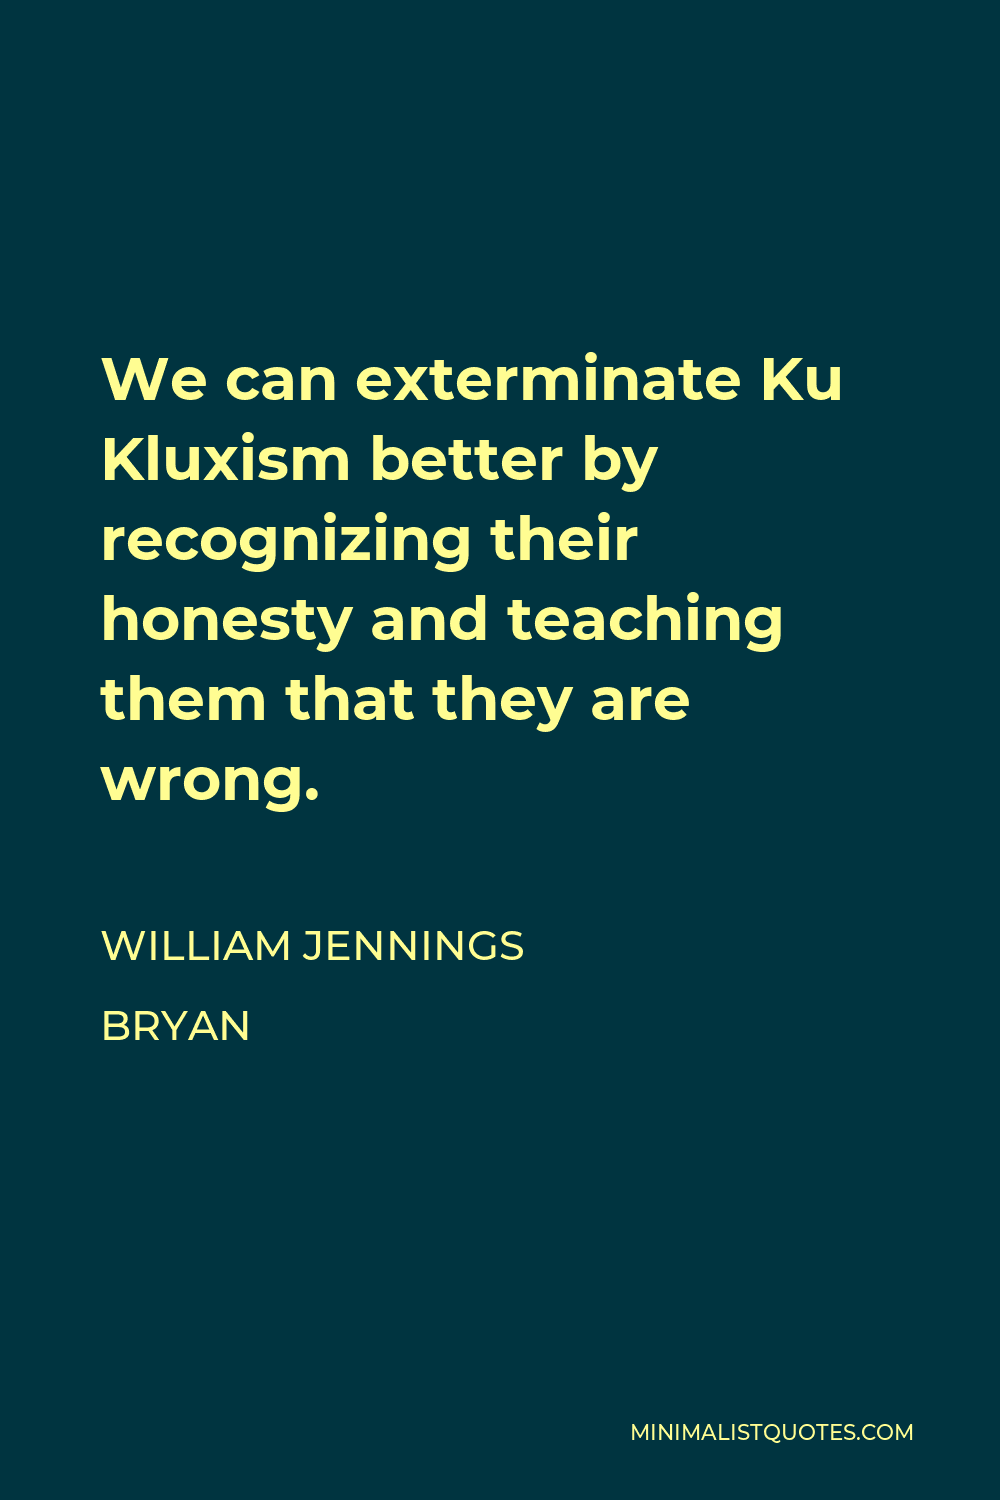 William Jennings Bryan Quote - We can exterminate Ku Kluxism better by recognizing their honesty and teaching them that they are wrong.